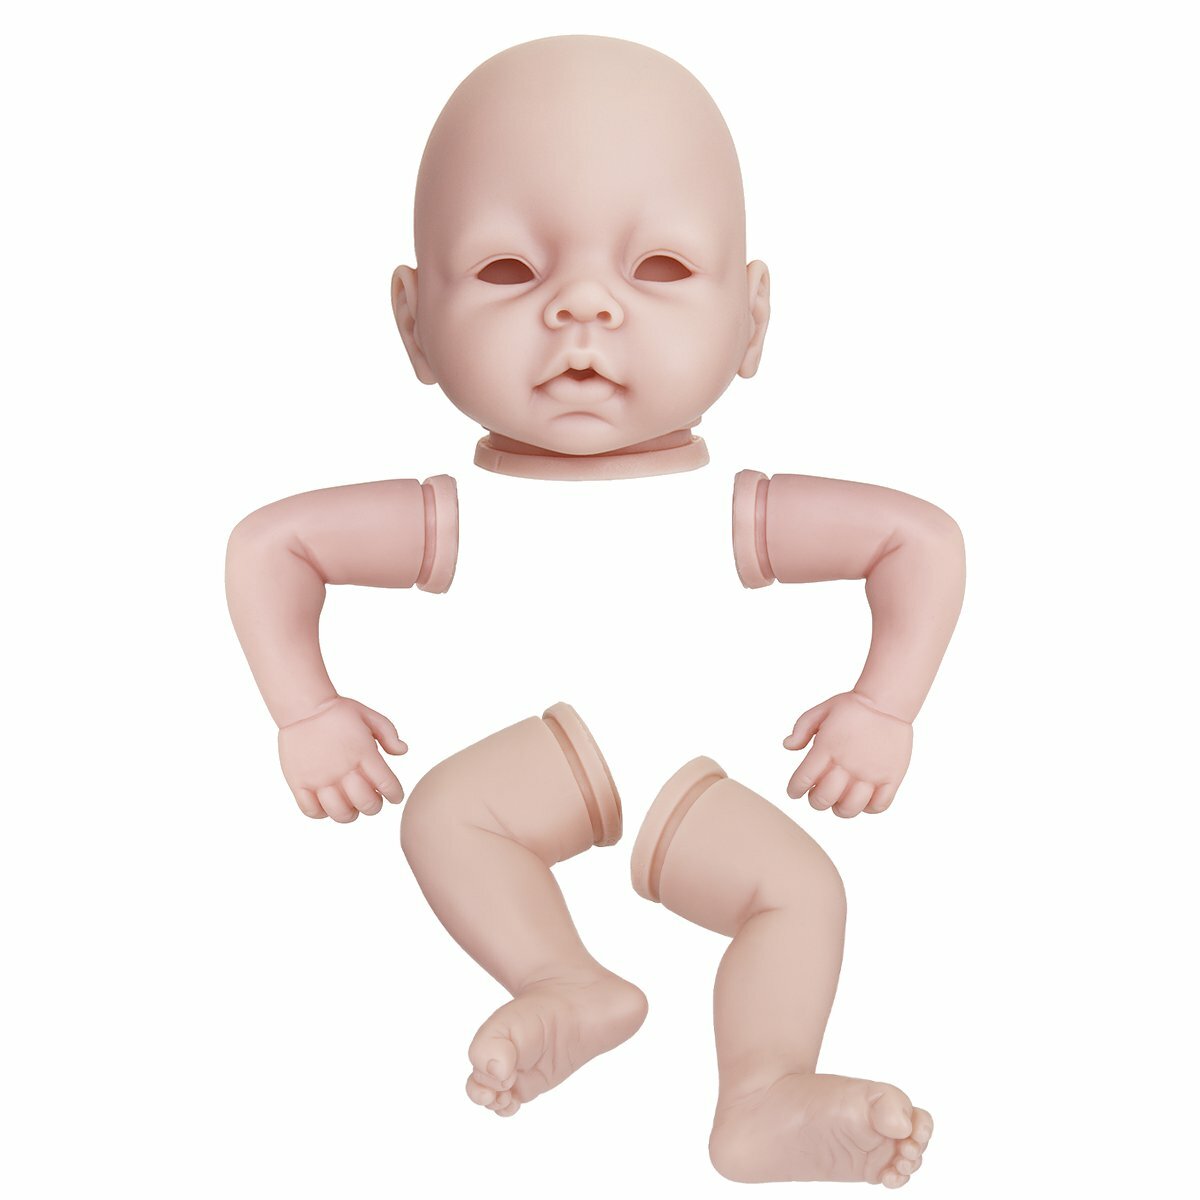 Silicone Vinyl DIY Reborn Baby Doll Accessories Lifelike Toddler Gifts No Body